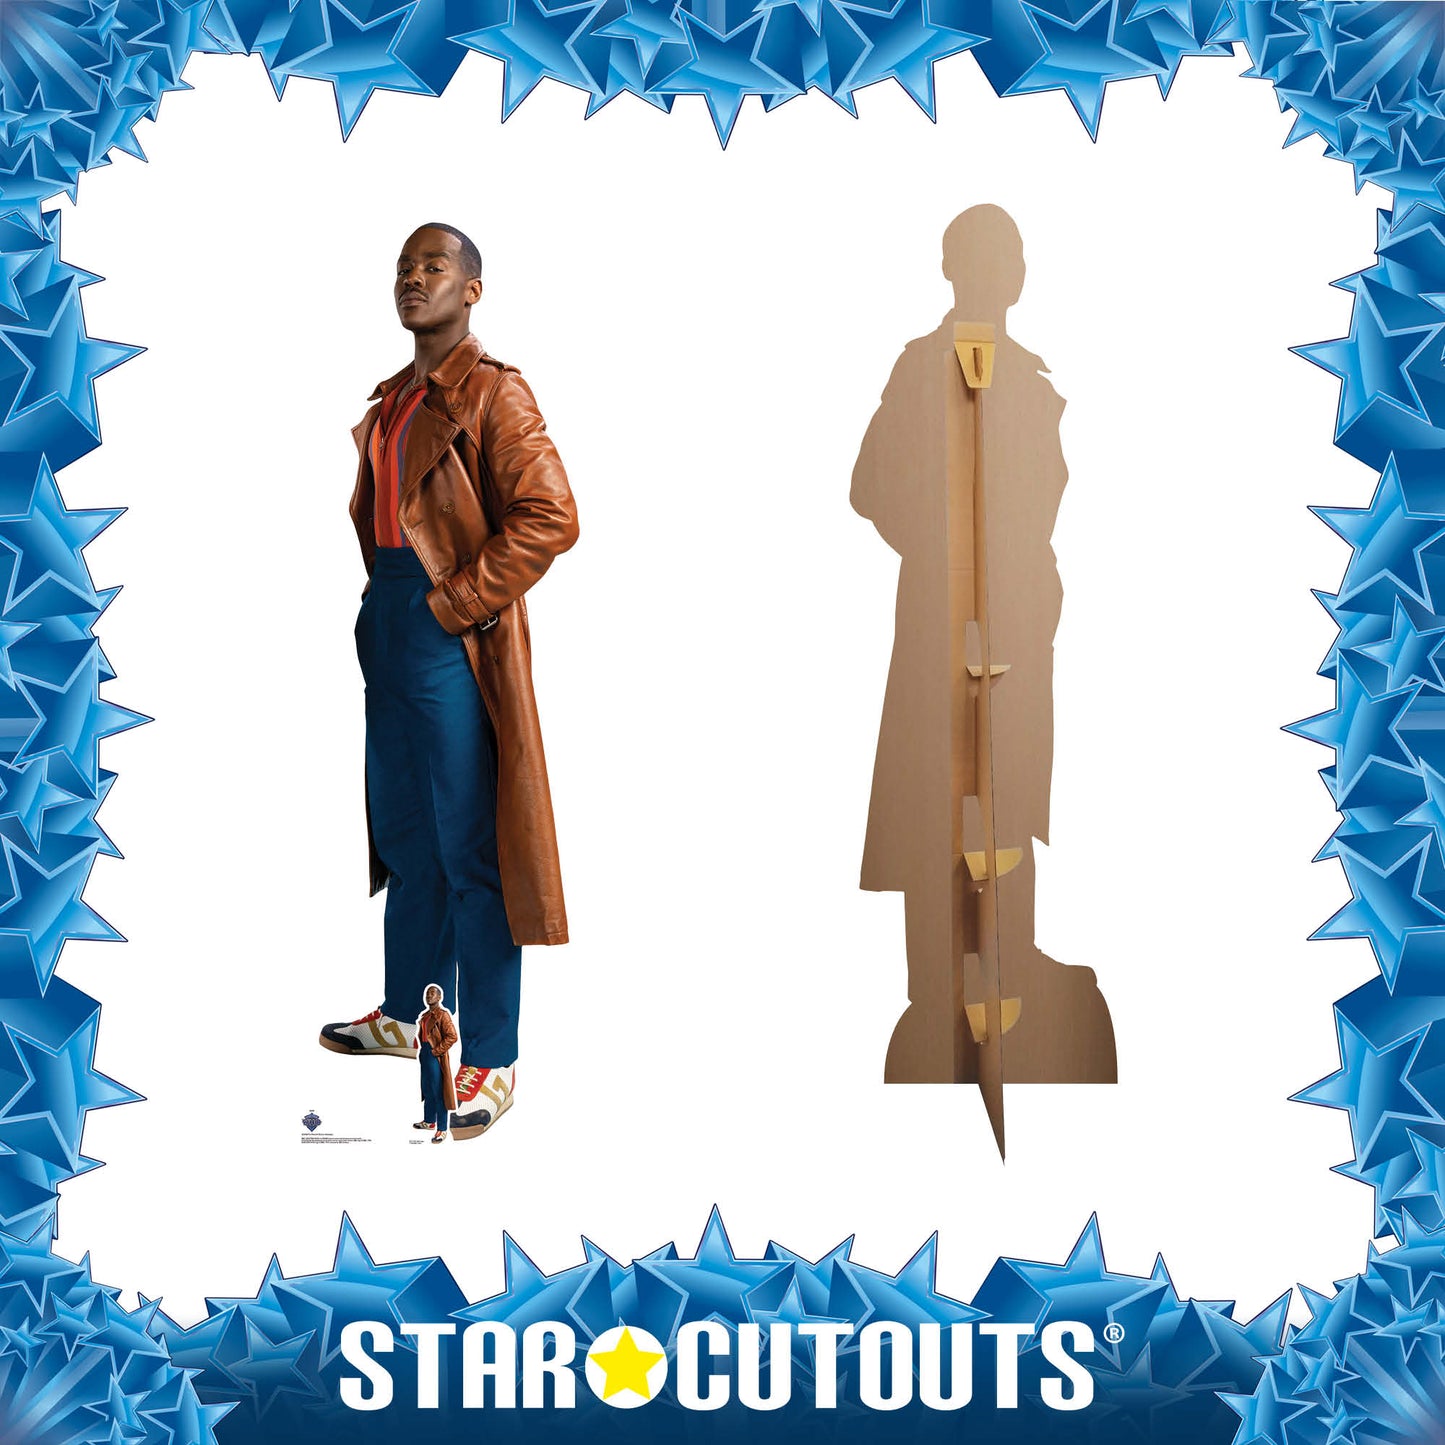 SC4508 Ncuti Gatwa as The Fifteenth Doctor - Doctor Who - Side Glance Variant Cardboard Cut Out Height 174cm